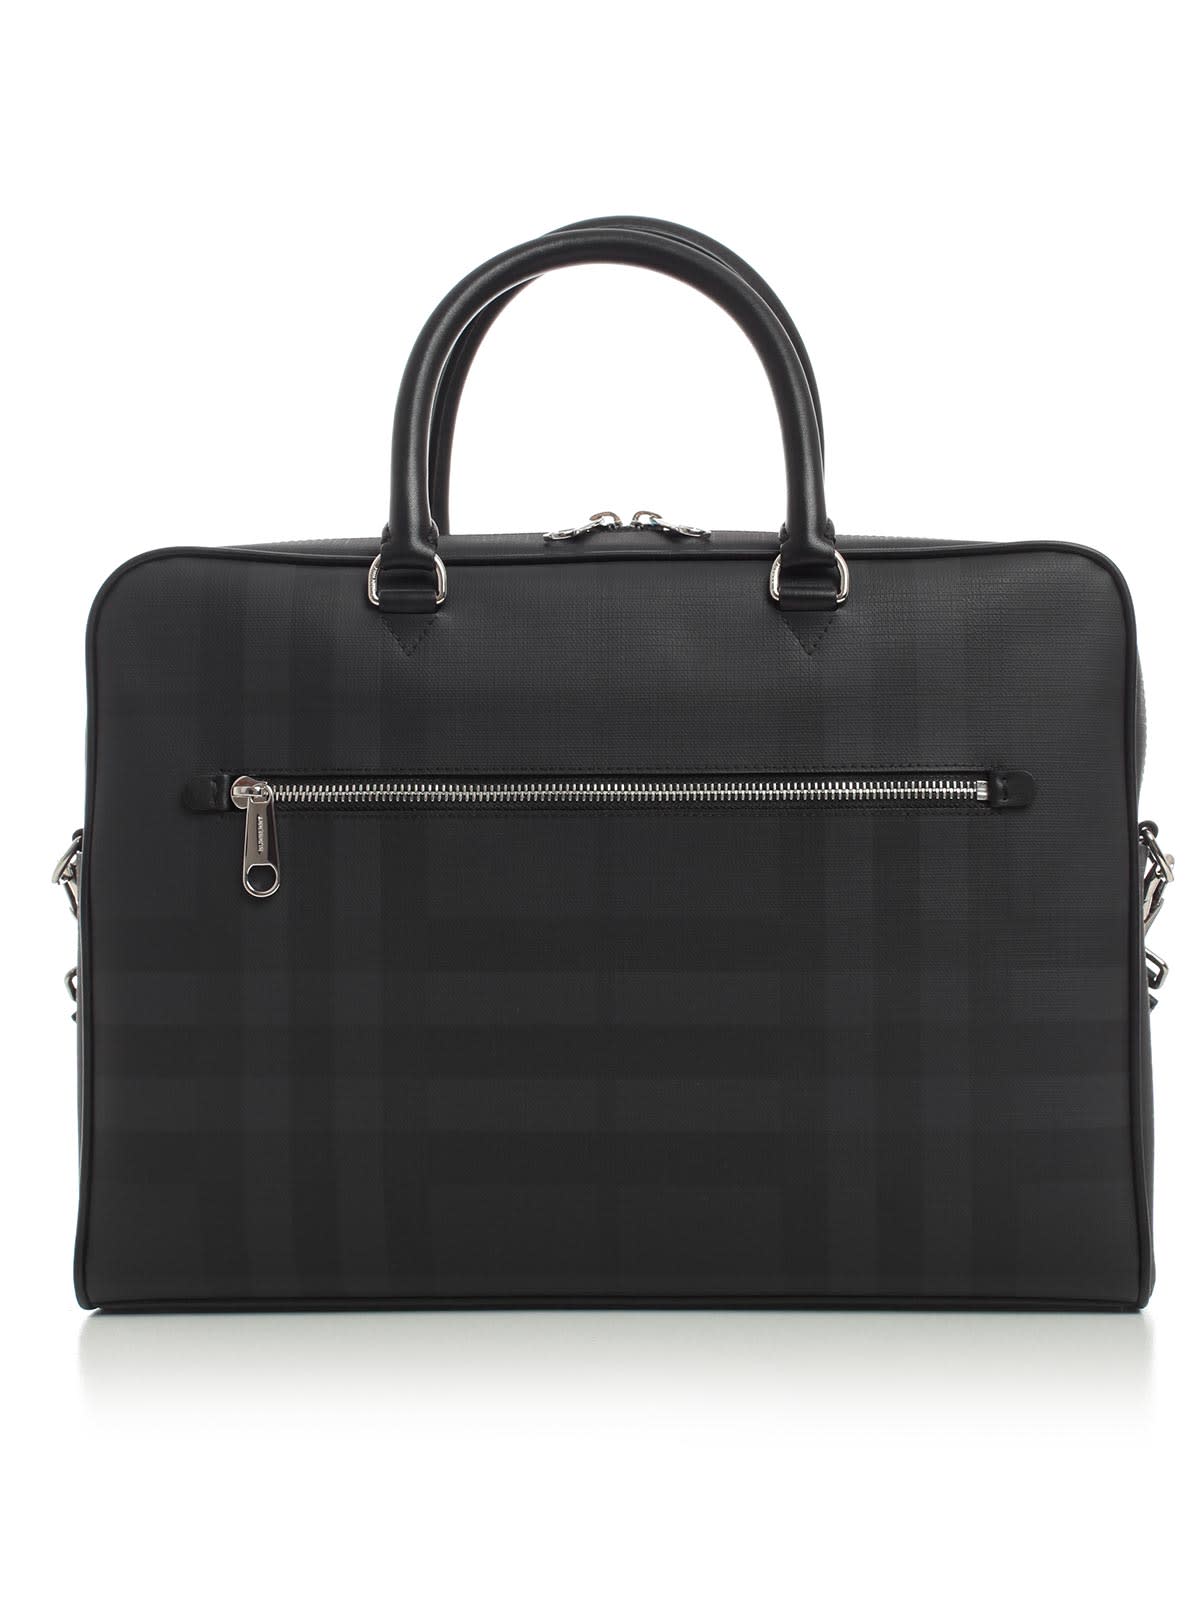 Burberry Briefcase London Check In Dark Charcoal | ModeSens